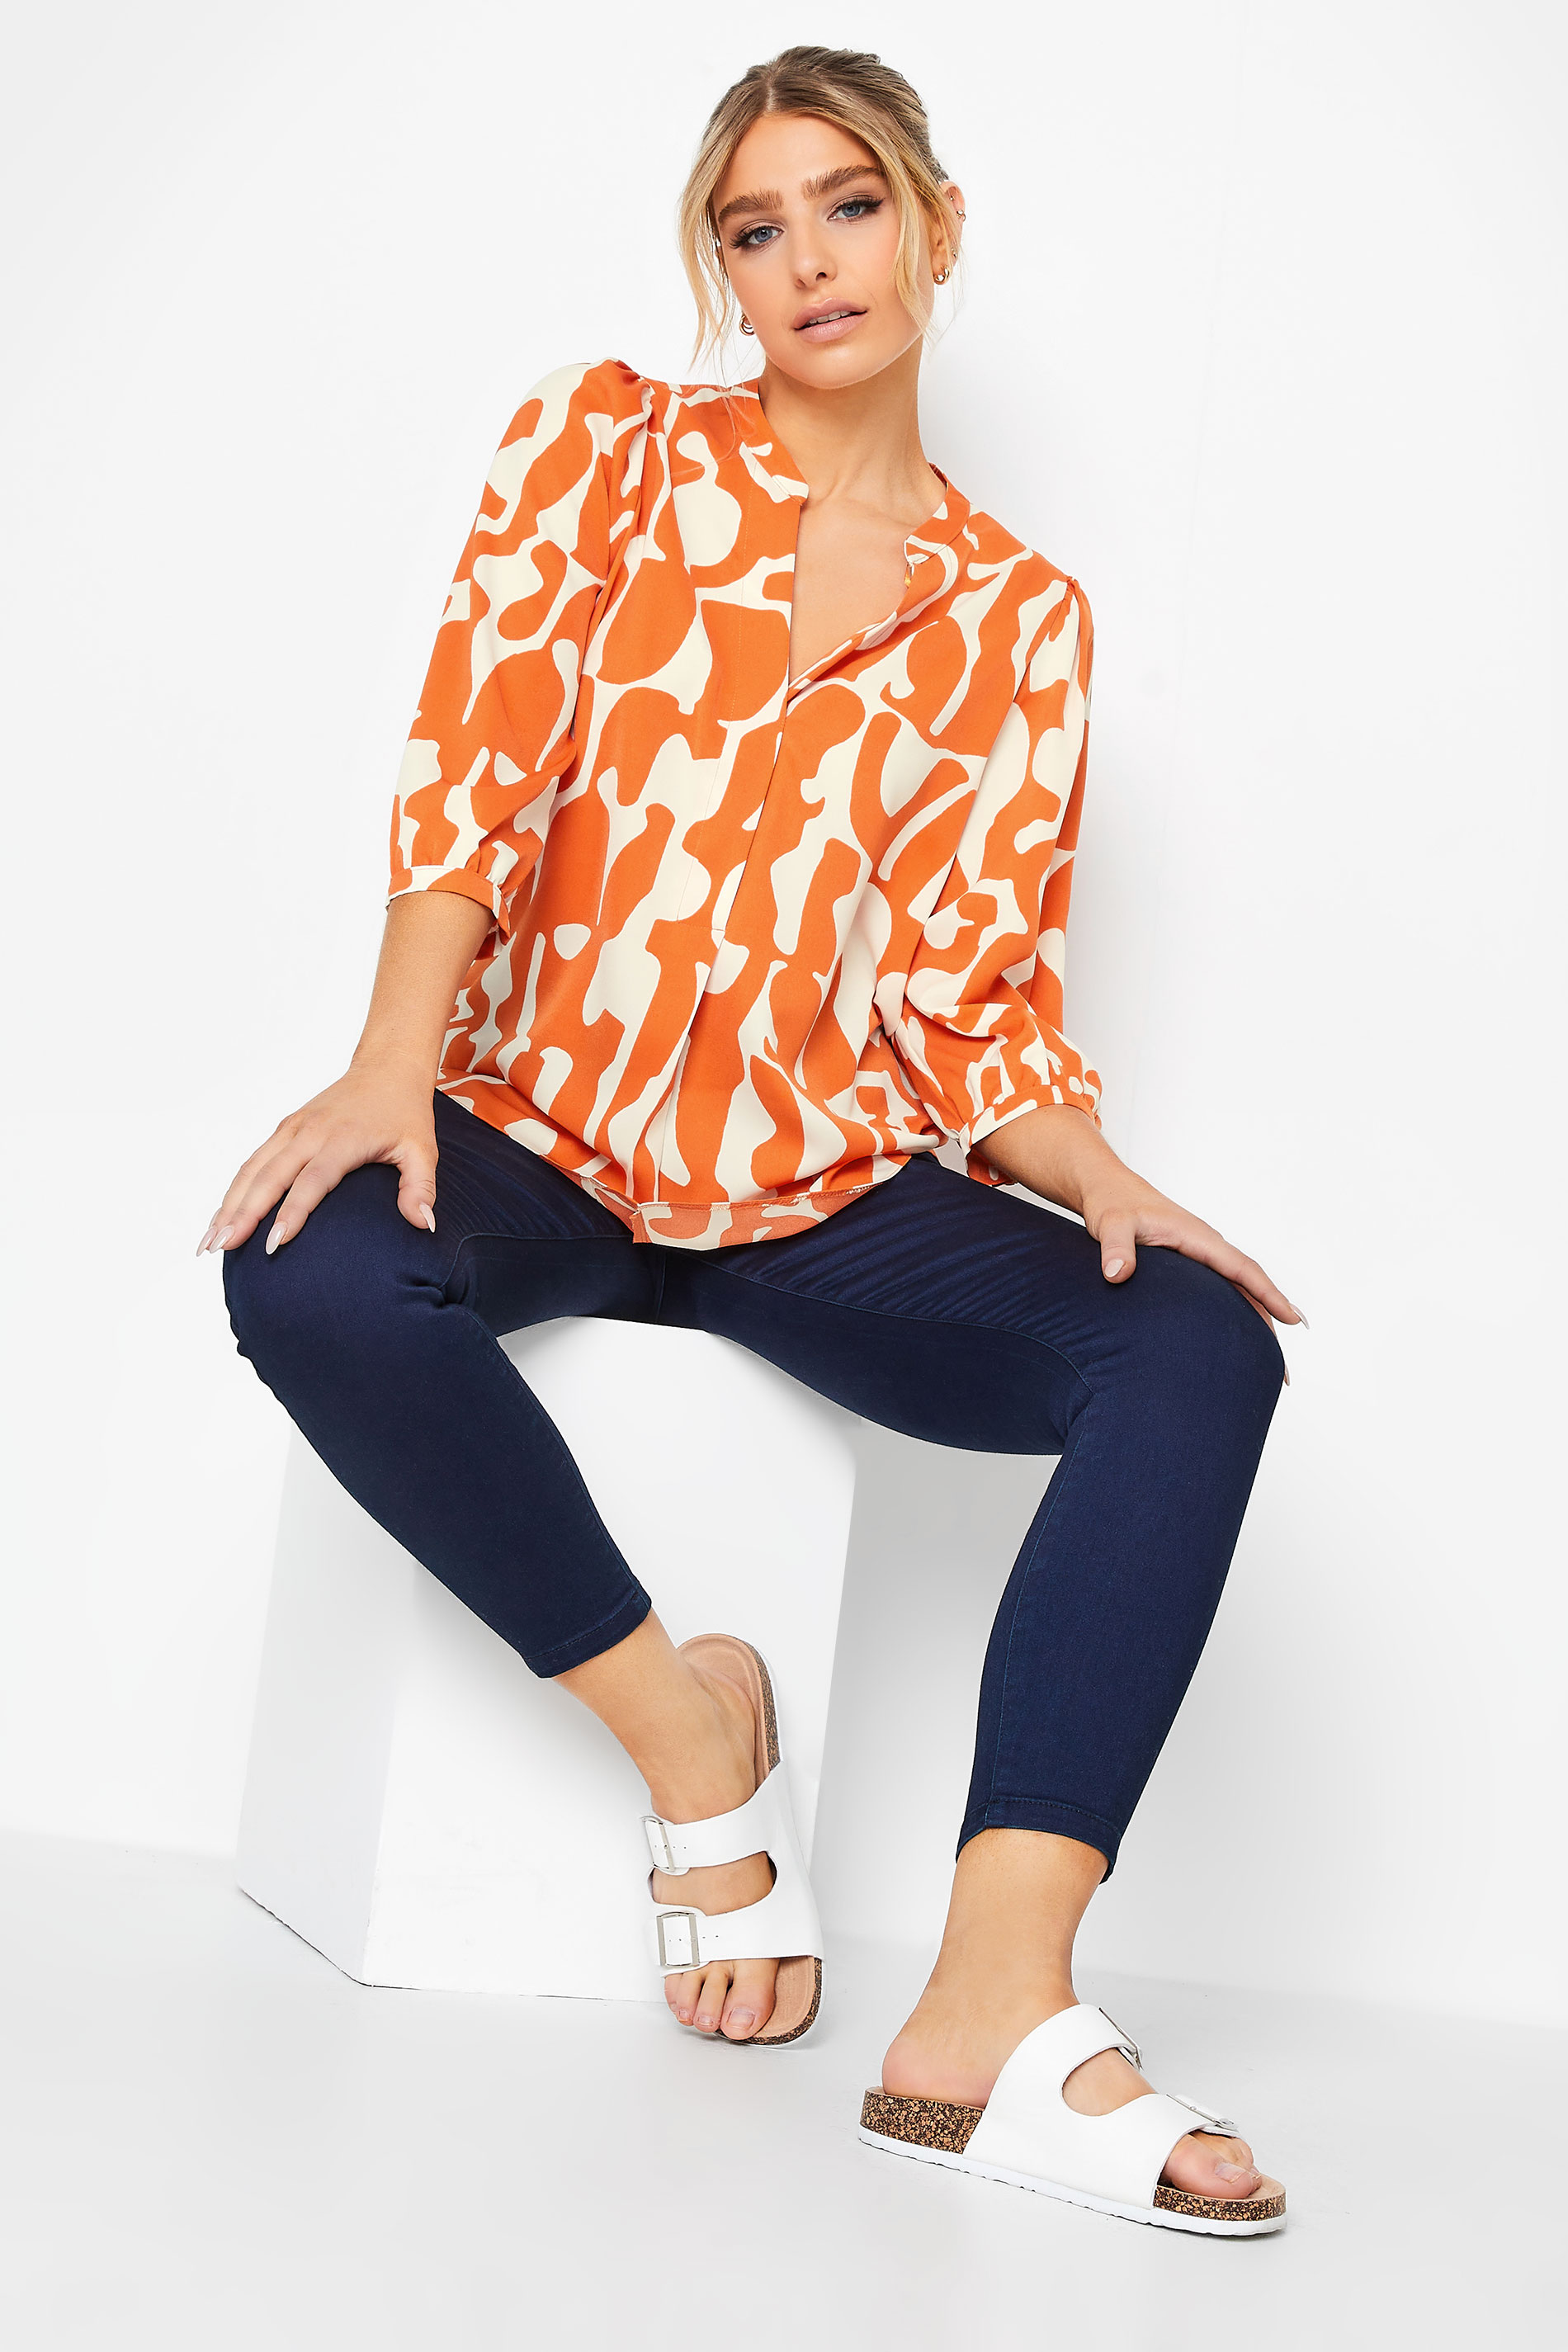 M&Co Orange Abstract Print 3/4 Sleeve Blouse | M&Co 2